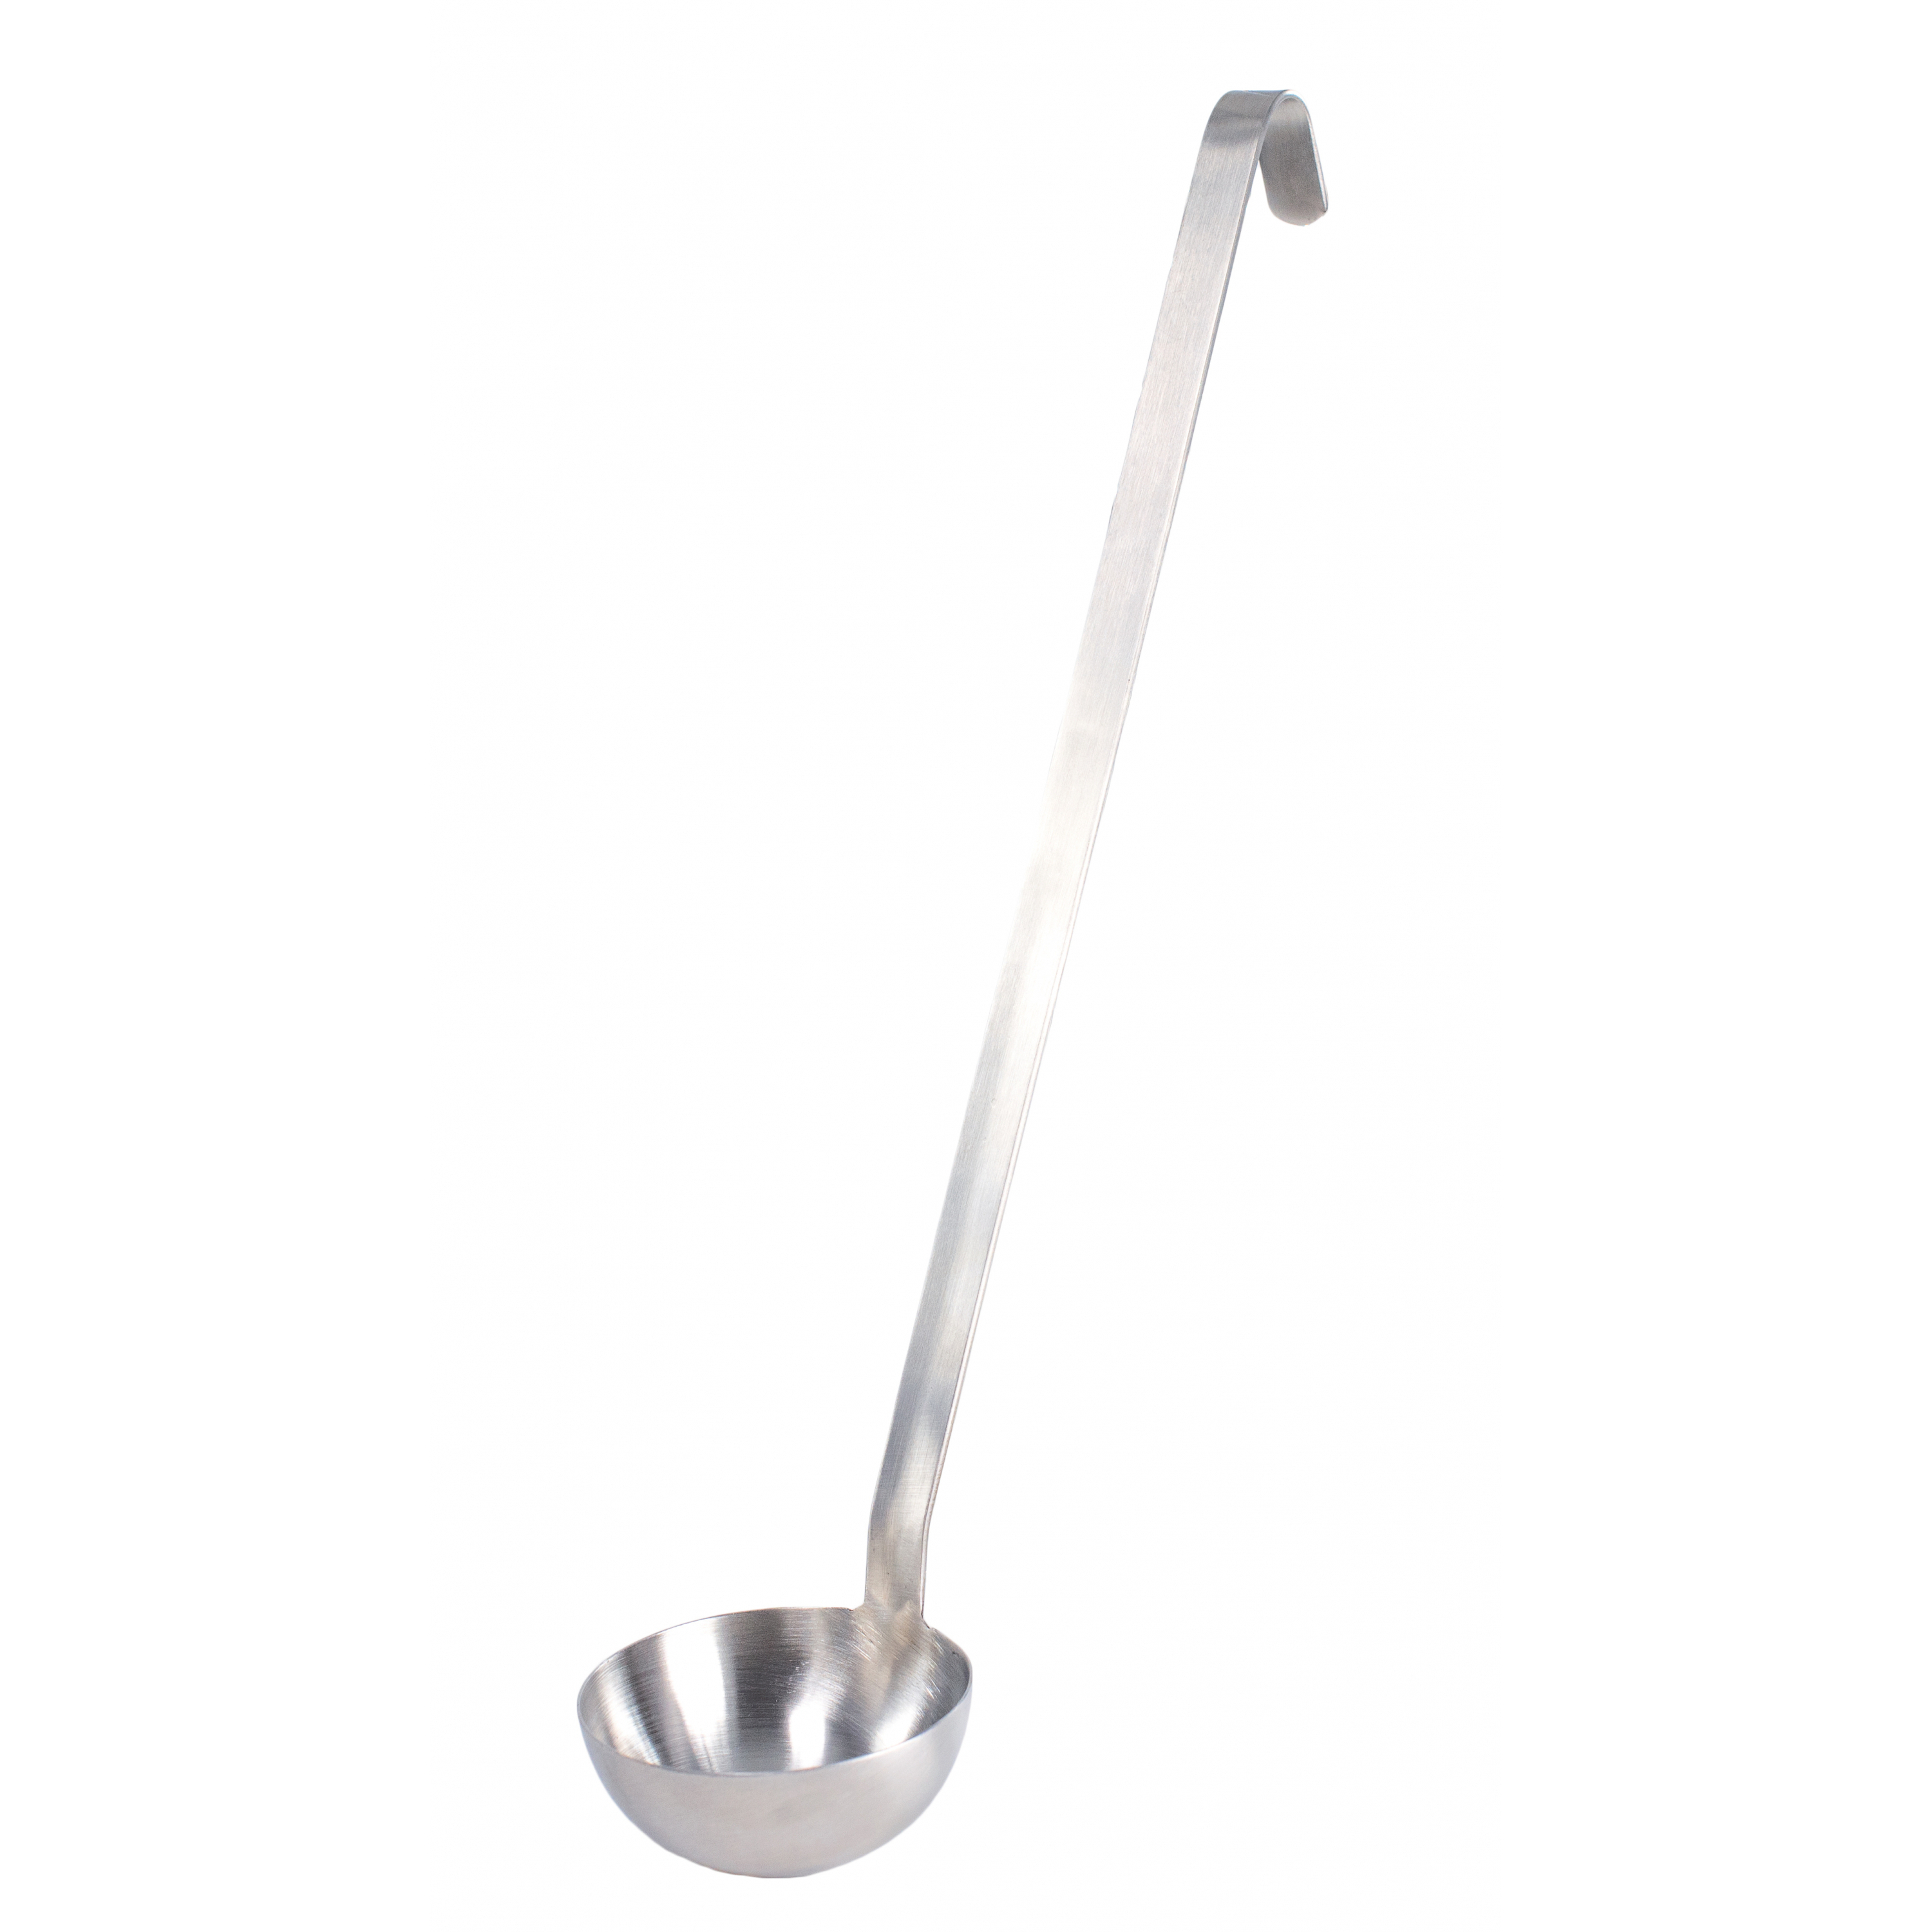 Stainless Steel Dipper with Hooked Handle Large Serving Ladle with Long Handle Commercial Grade Ladle Color : Green, Size : 1L